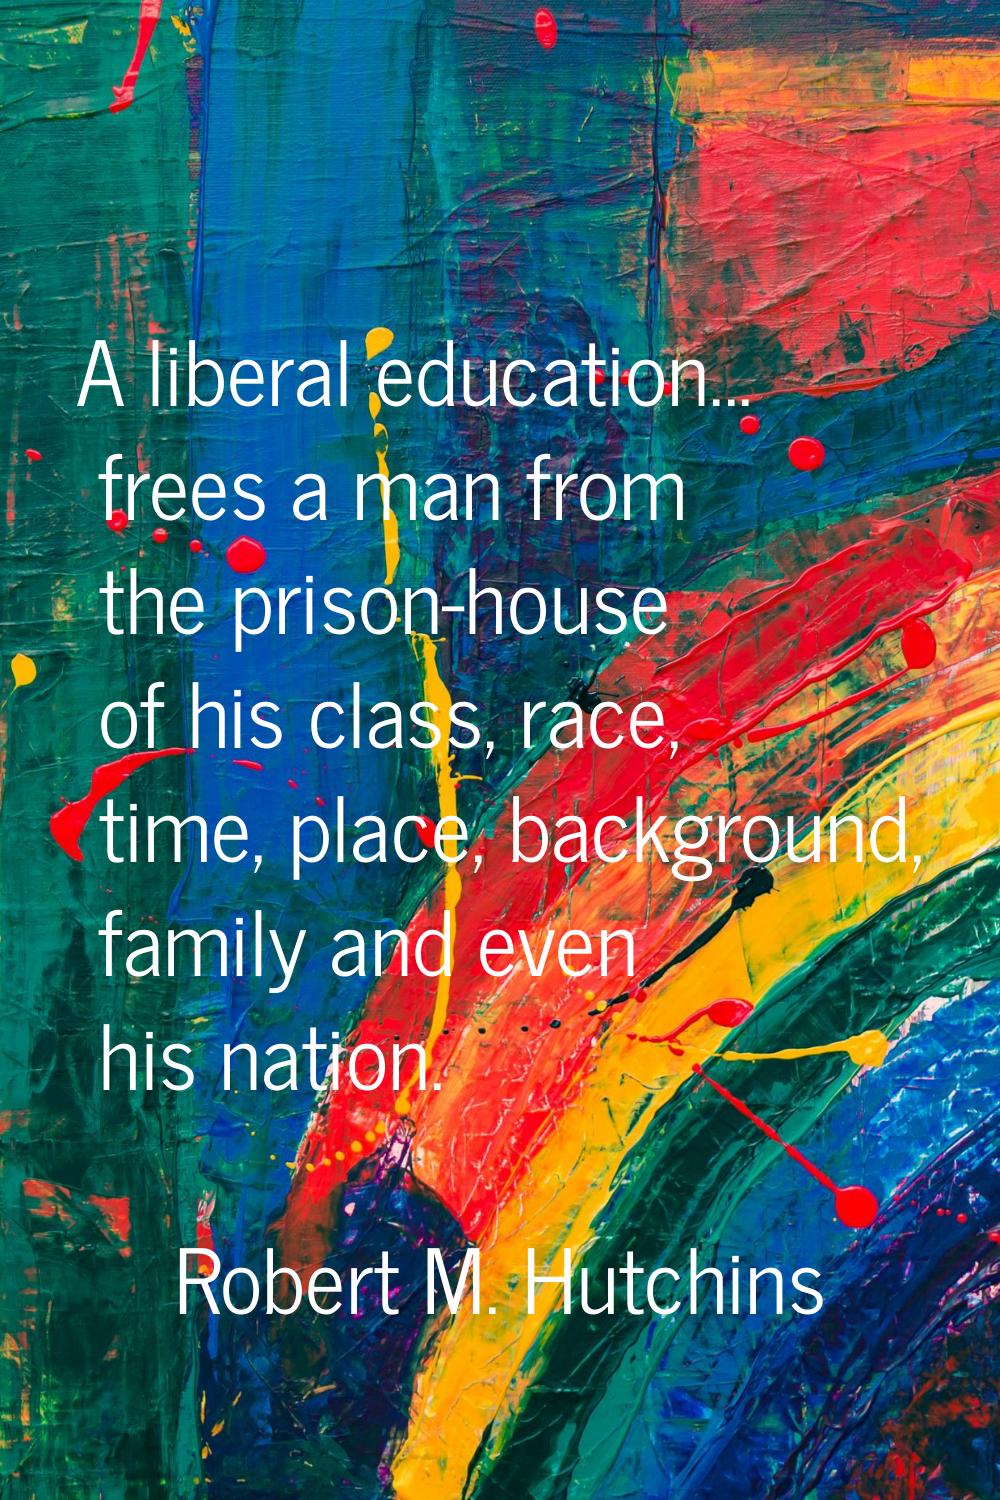 A liberal education... frees a man from the prison-house of his class, race, time, place, backgroun